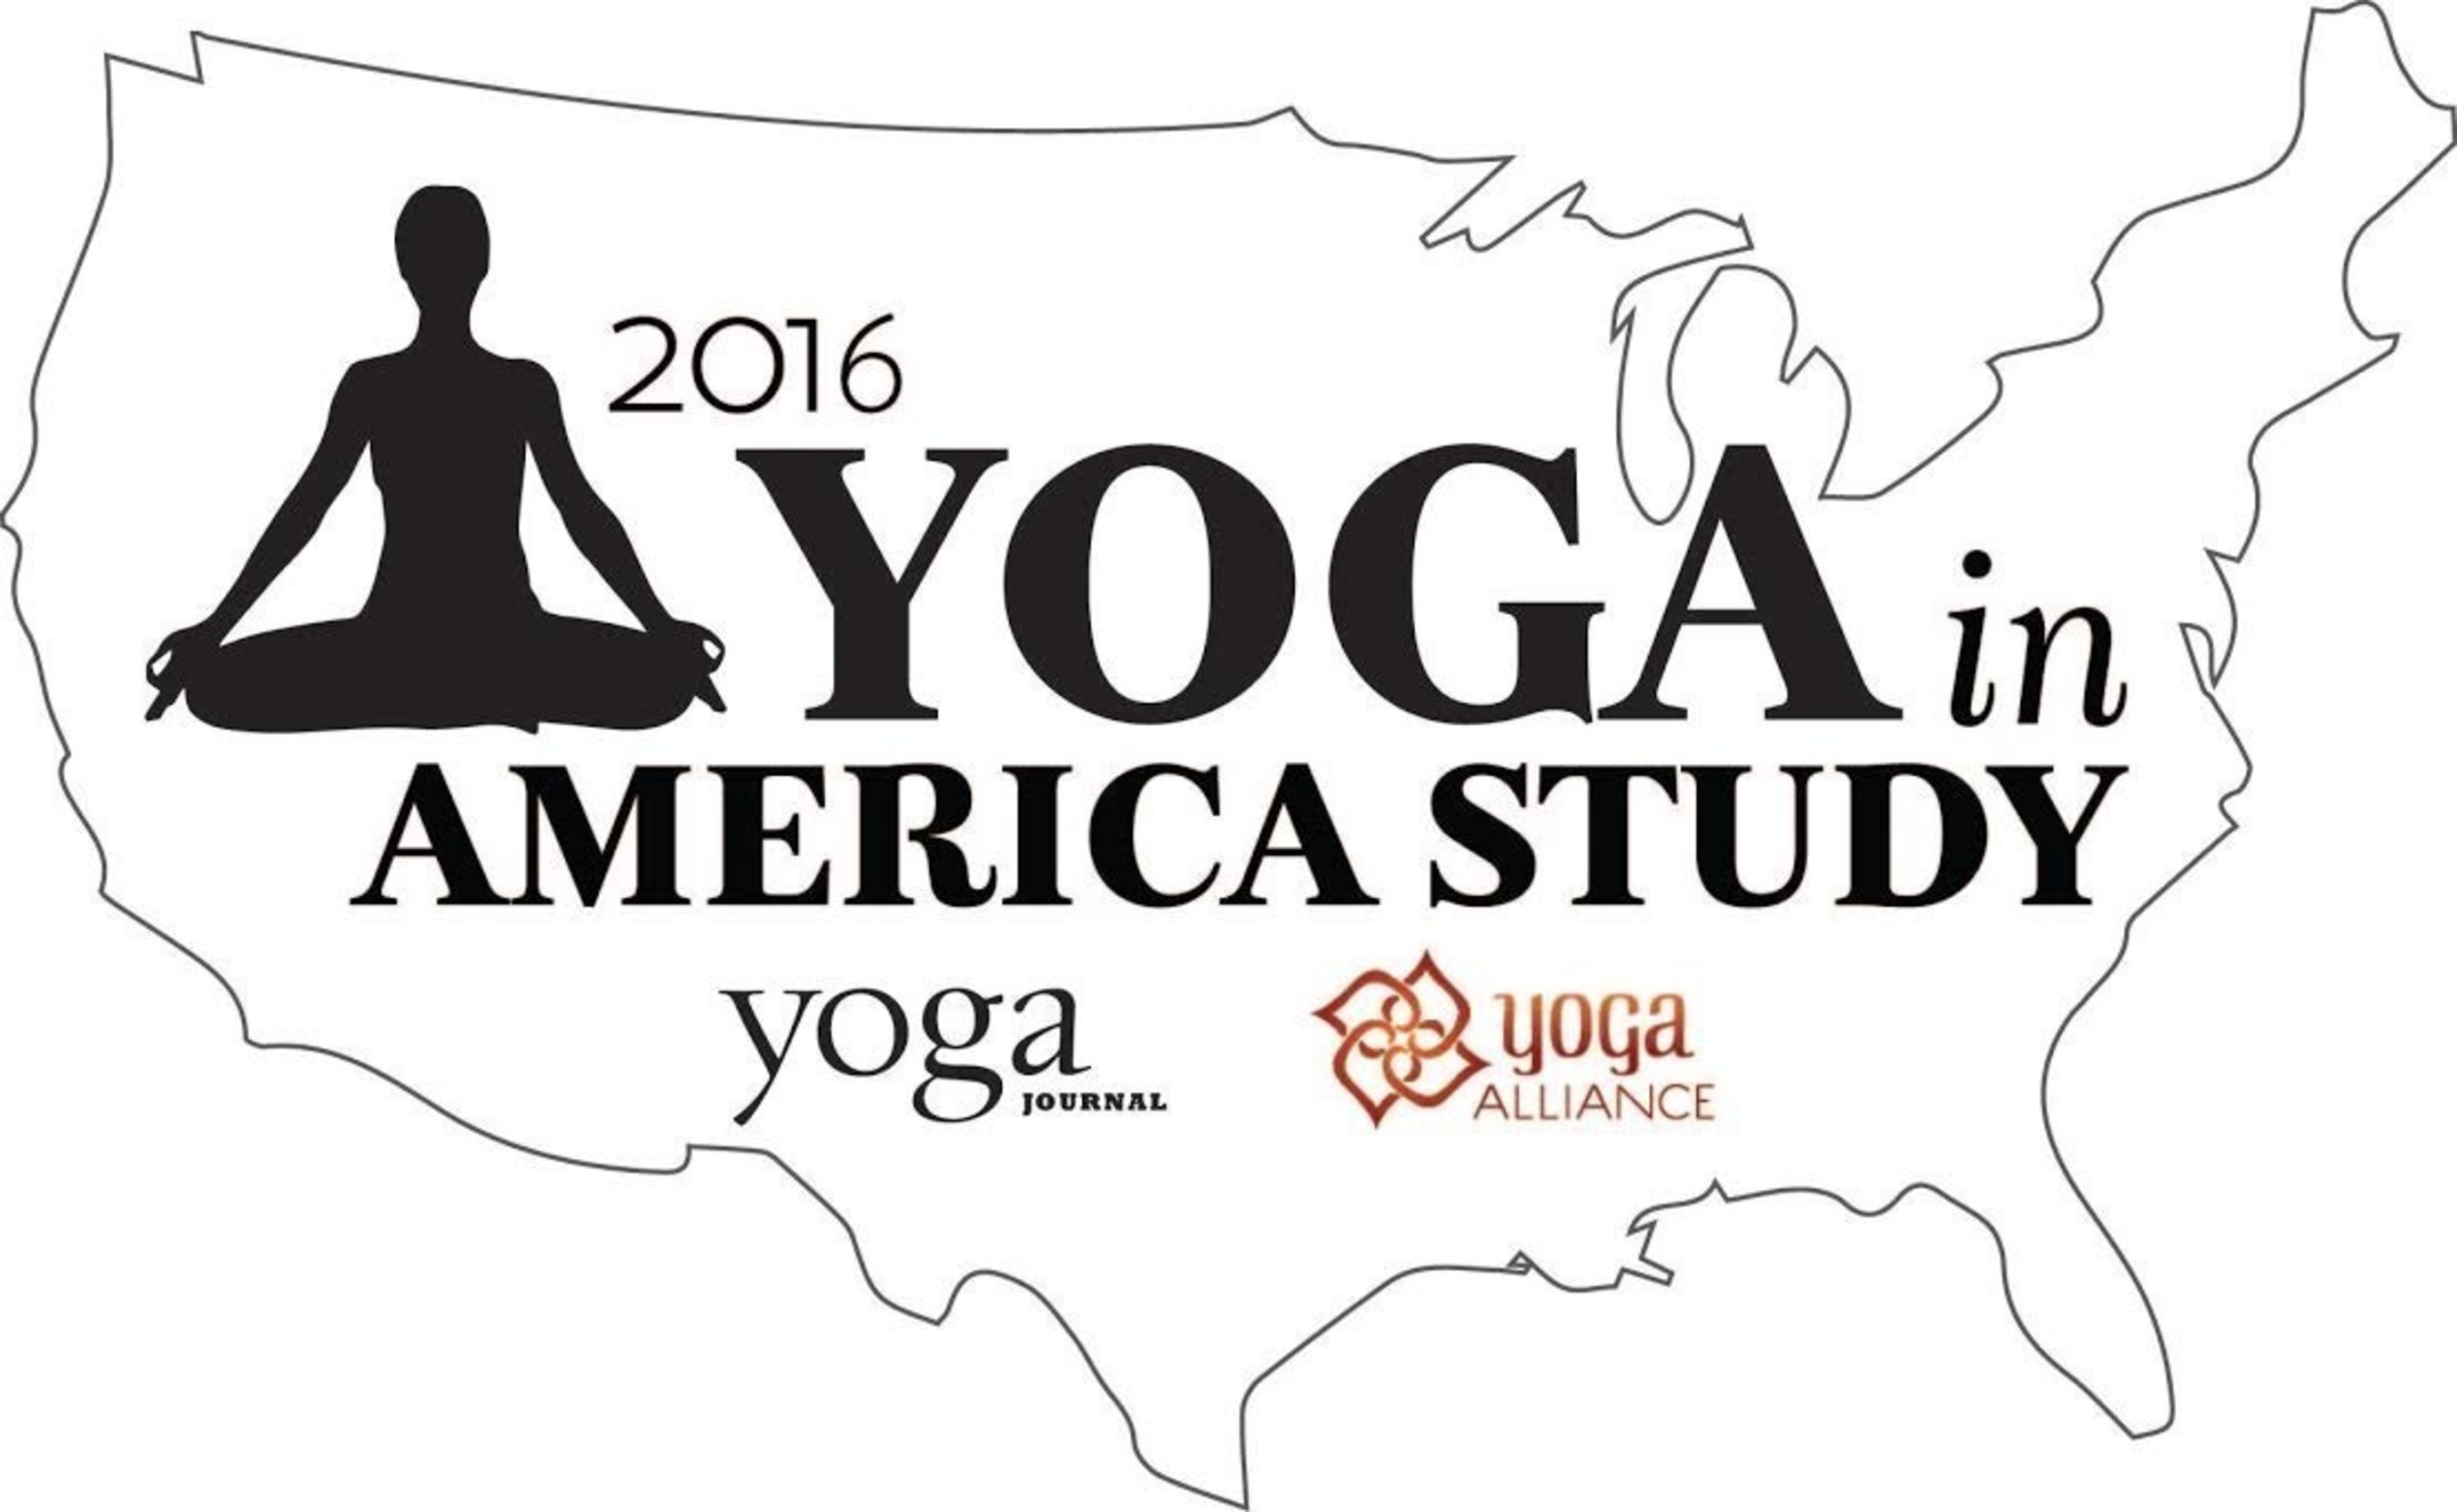 2016 Yoga in America Study Conducted by Yoga Journal and Yoga Alliance